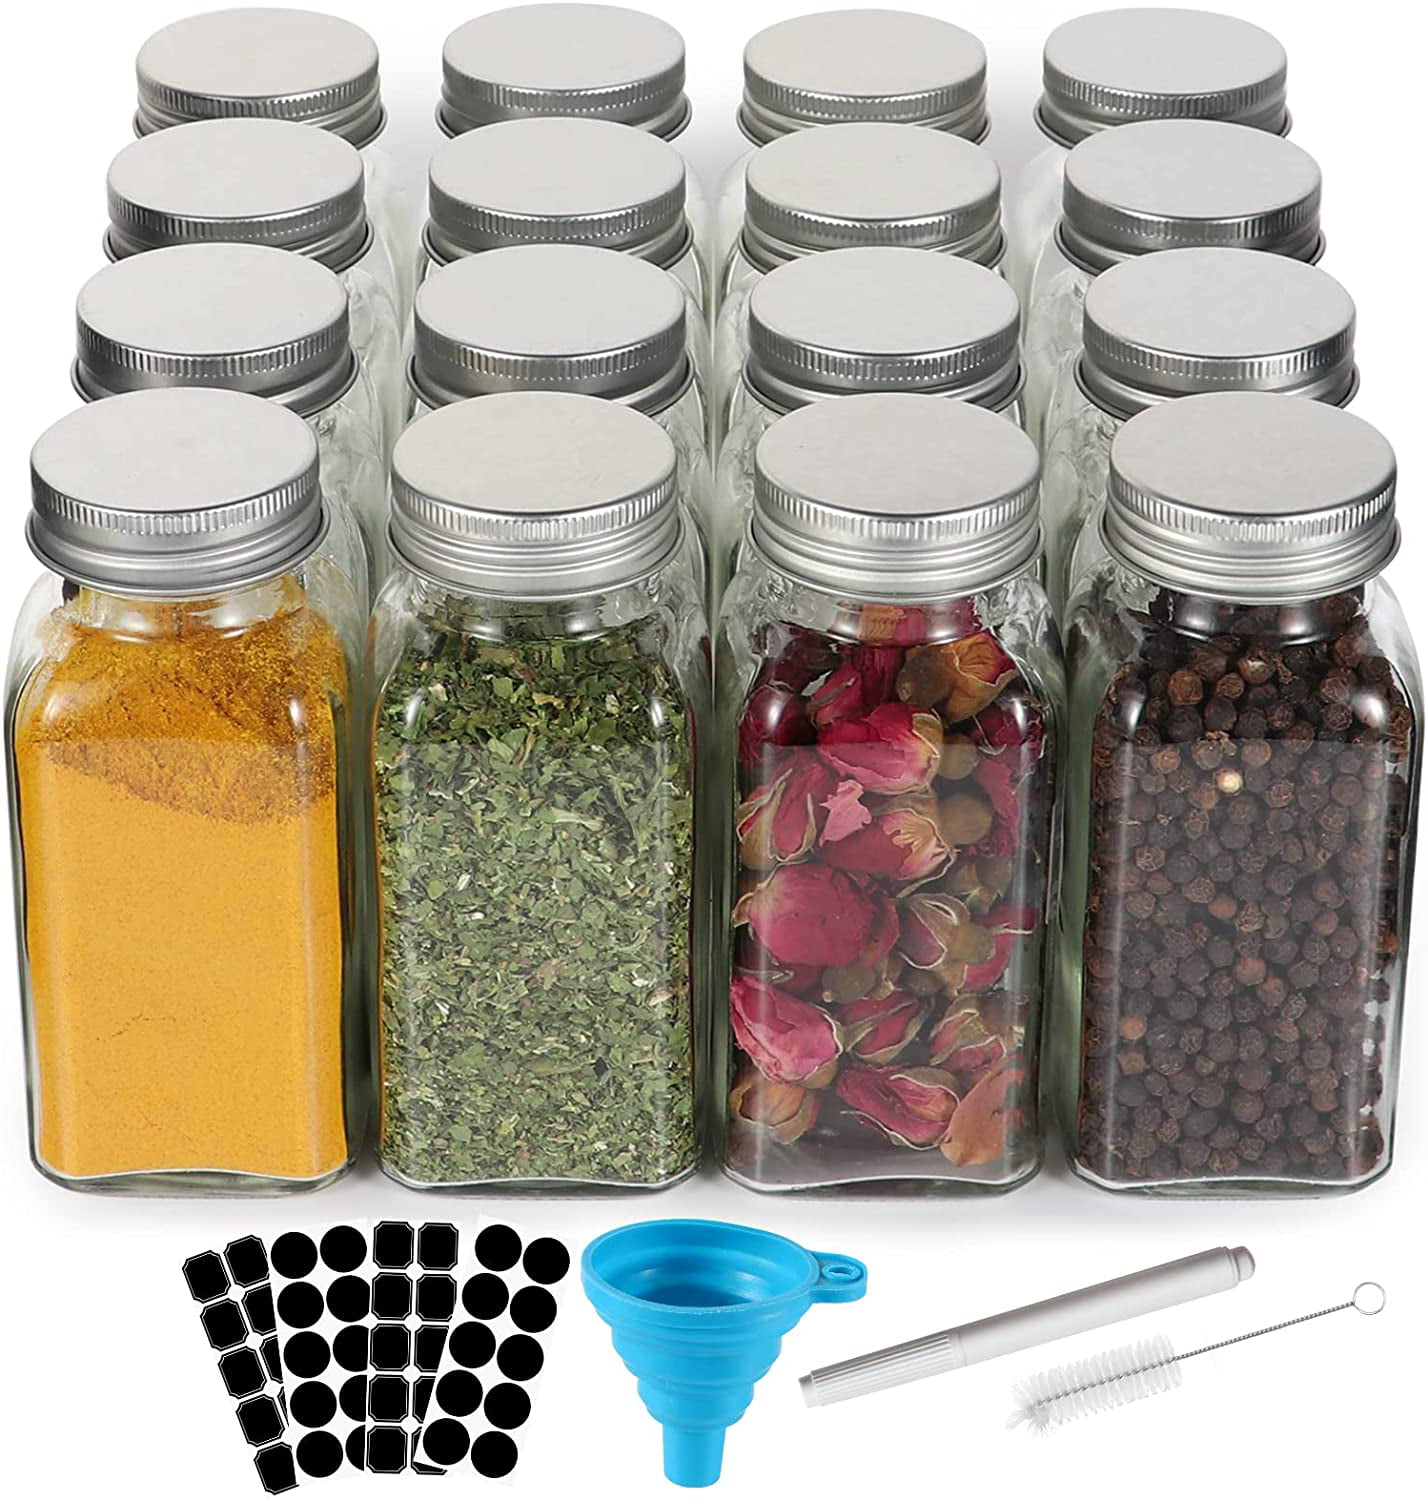 SWOMMOLY 30 Glass Spice Jars 6 oz Empty Square Spice Bottles with 703 Spice  Labels, Chalk Marker and Funnel Complete Set. 30 Spice Containers with